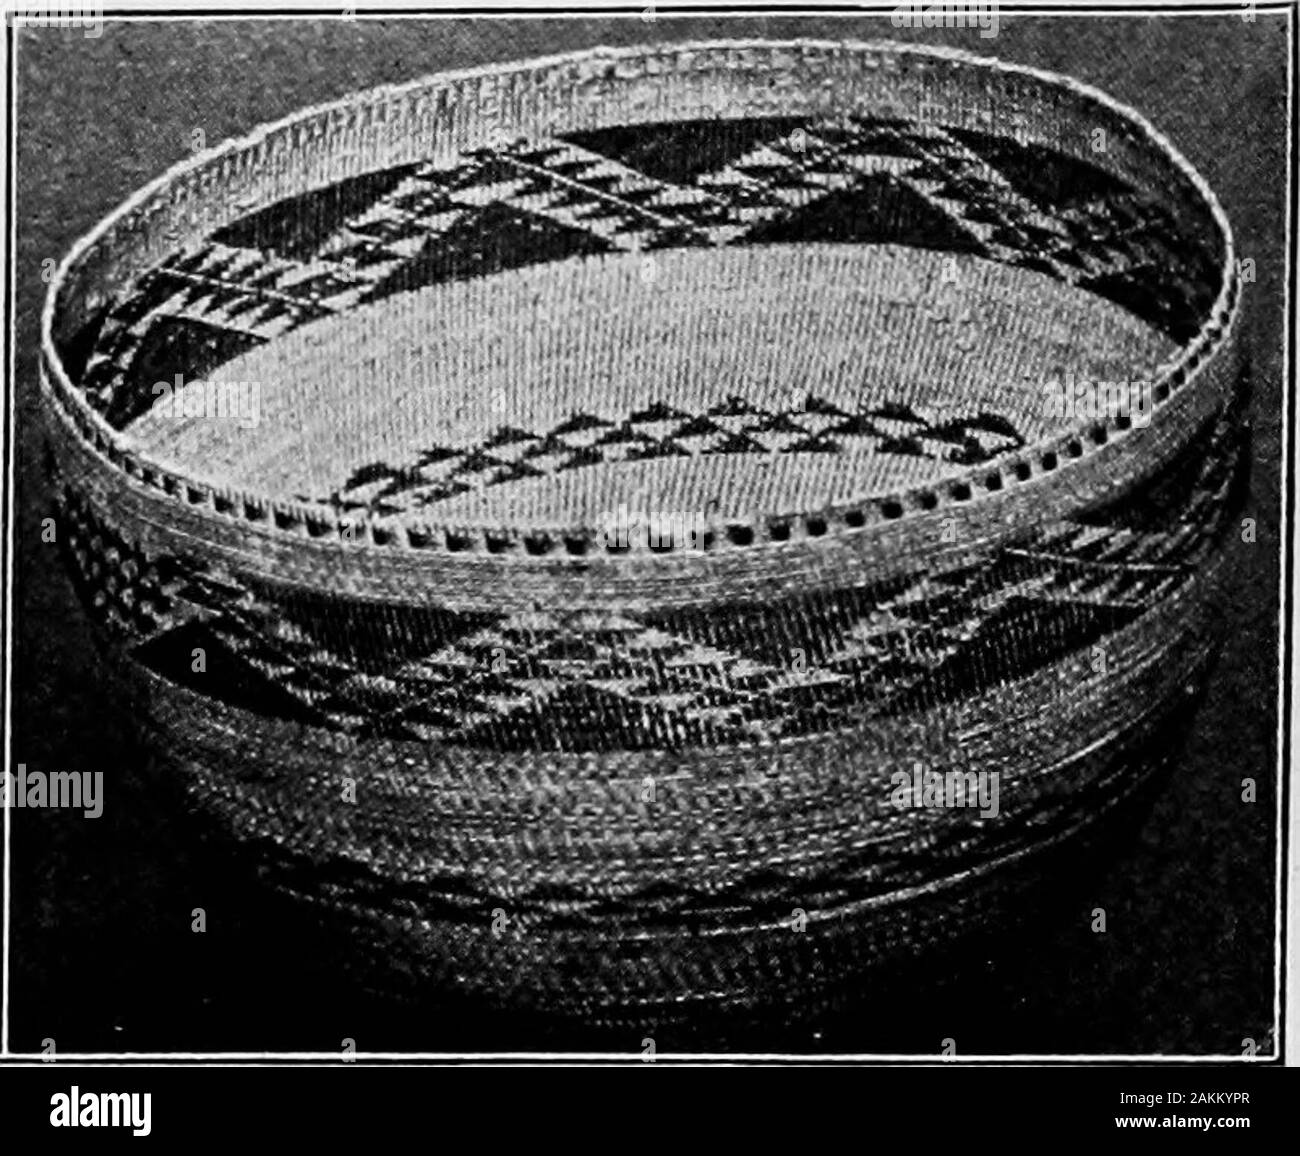 Pomo Indian baskets and their makers . -kalle or bam tree. The bams are the frame work; the thread is obtained from thebark of shrubs and the roots of trees and grasses. The mostimportant of these fibers is ka-hum, which is the root of asedge (Carex Mendocinoensis), which grows in deep, moist soilin most sections of the Pomo country. This sedge has long,slender, grassy leaves and a very long running root which isquite tough. The Indian women split these roots with theirteeth and coil them in bundles which are dried ready for use. When cured, ka-hum is of a light cream color, but deepenswith ag Stock Photo